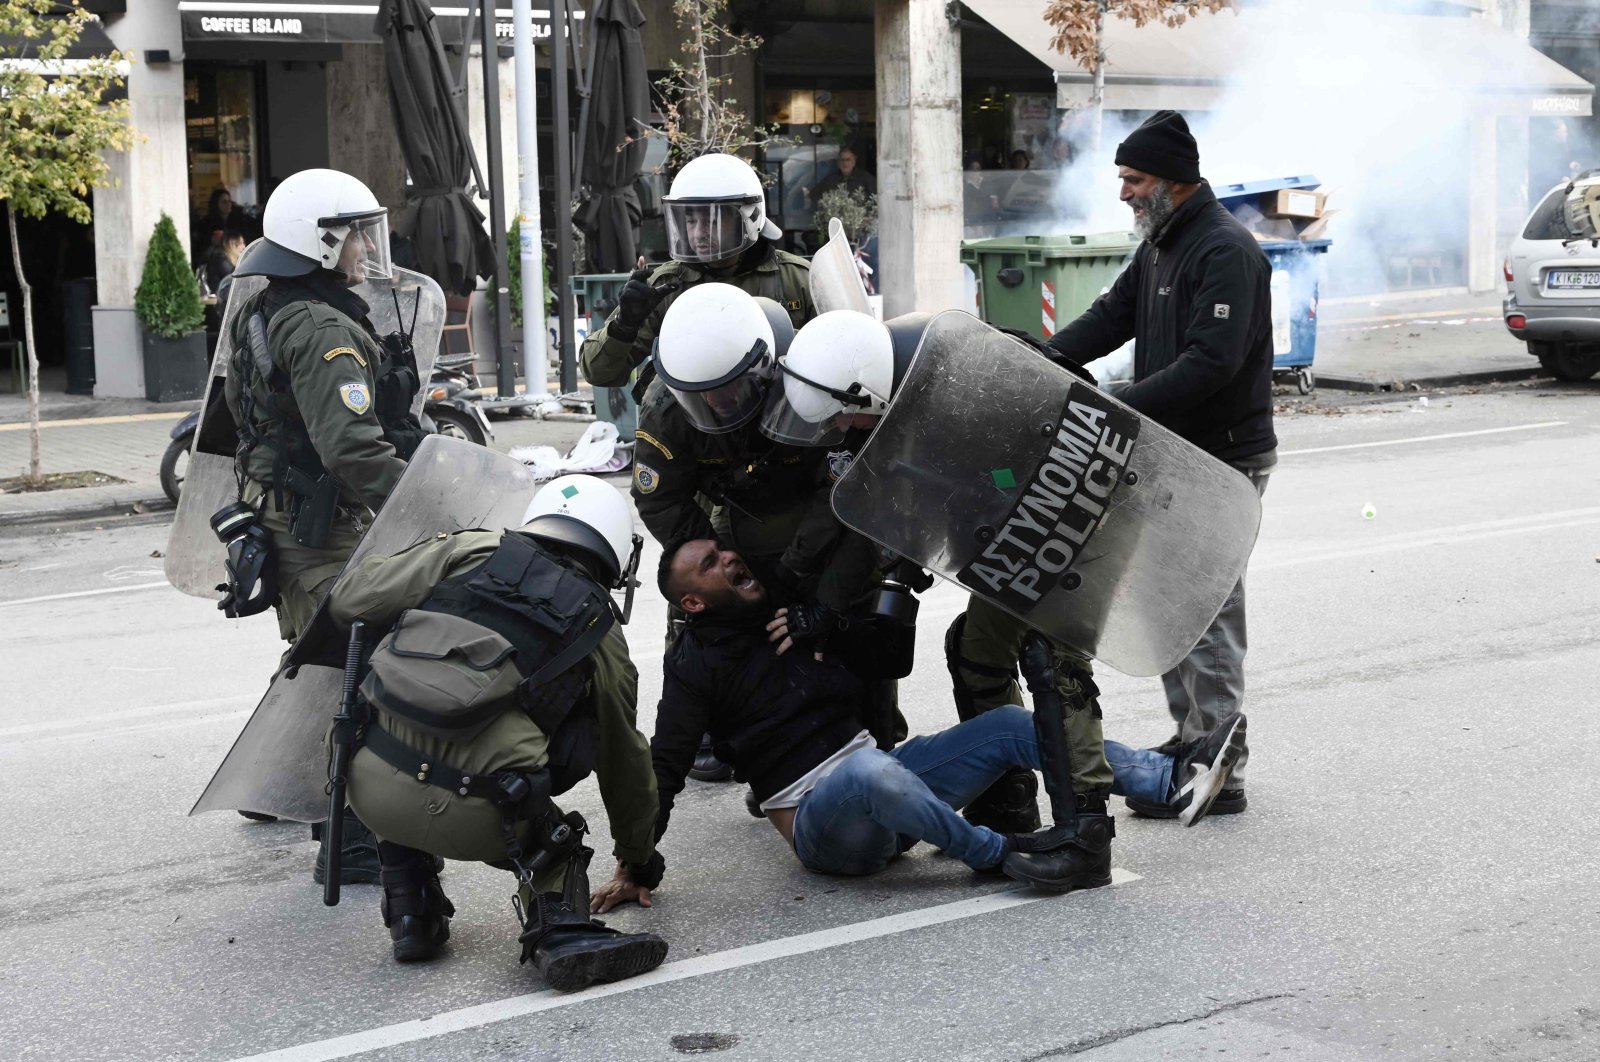 Riot police officers detain a protester following clashes between members of the Roma community in Thessaloniki, Greece, Dec. 5, 2022. (AFP Photo)